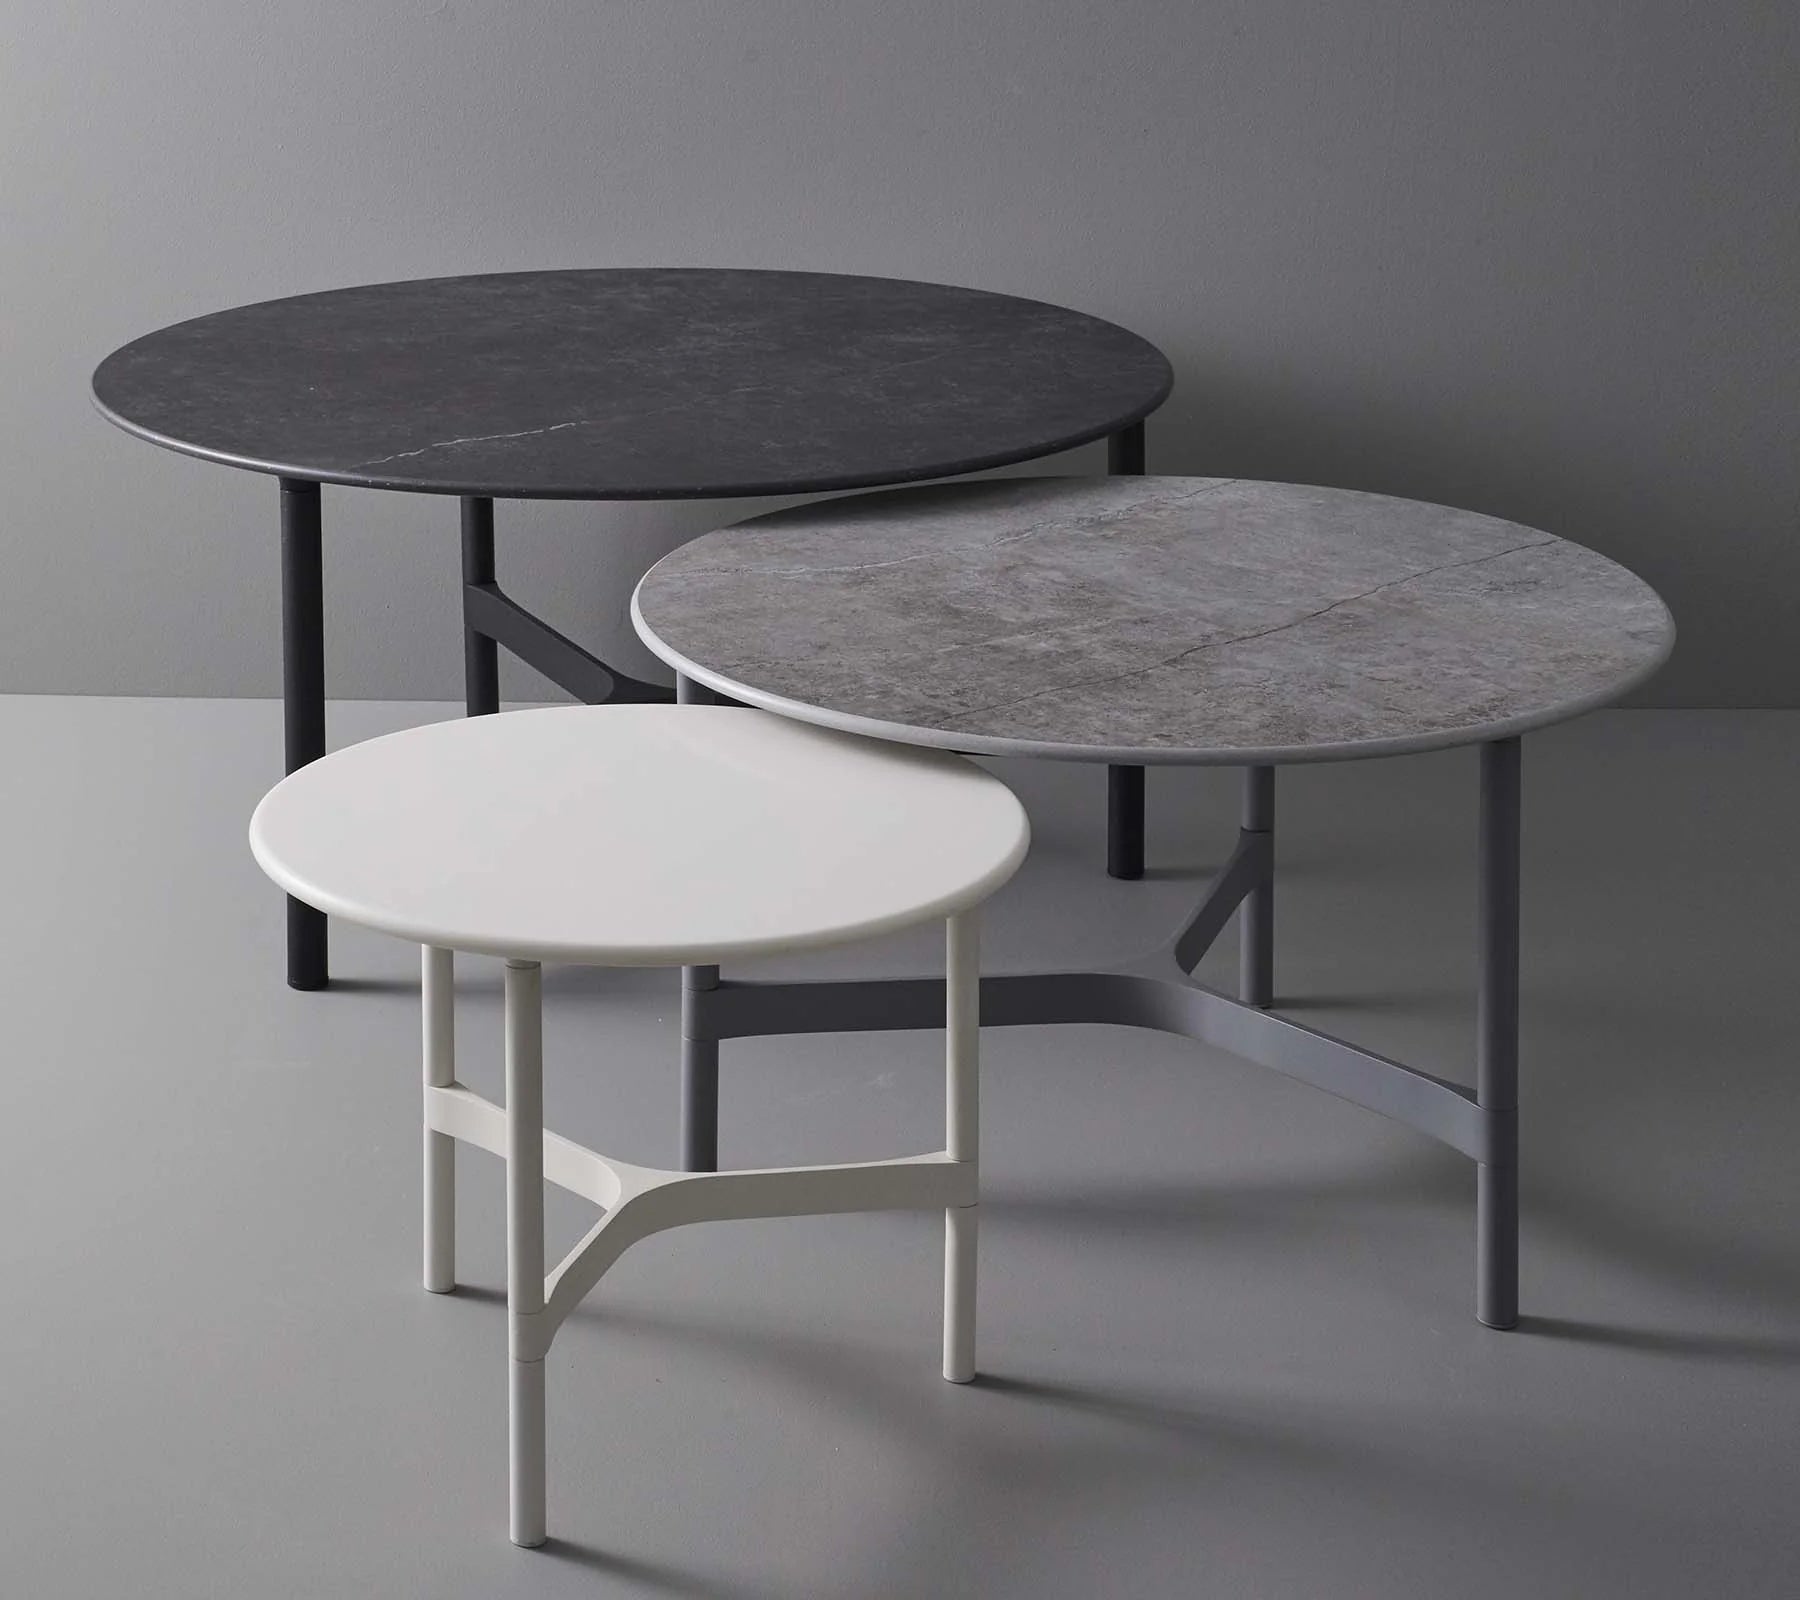  Boxhill's Twist outdoor round coffee table in black, grey and white colors with different sizes placed against grey wall